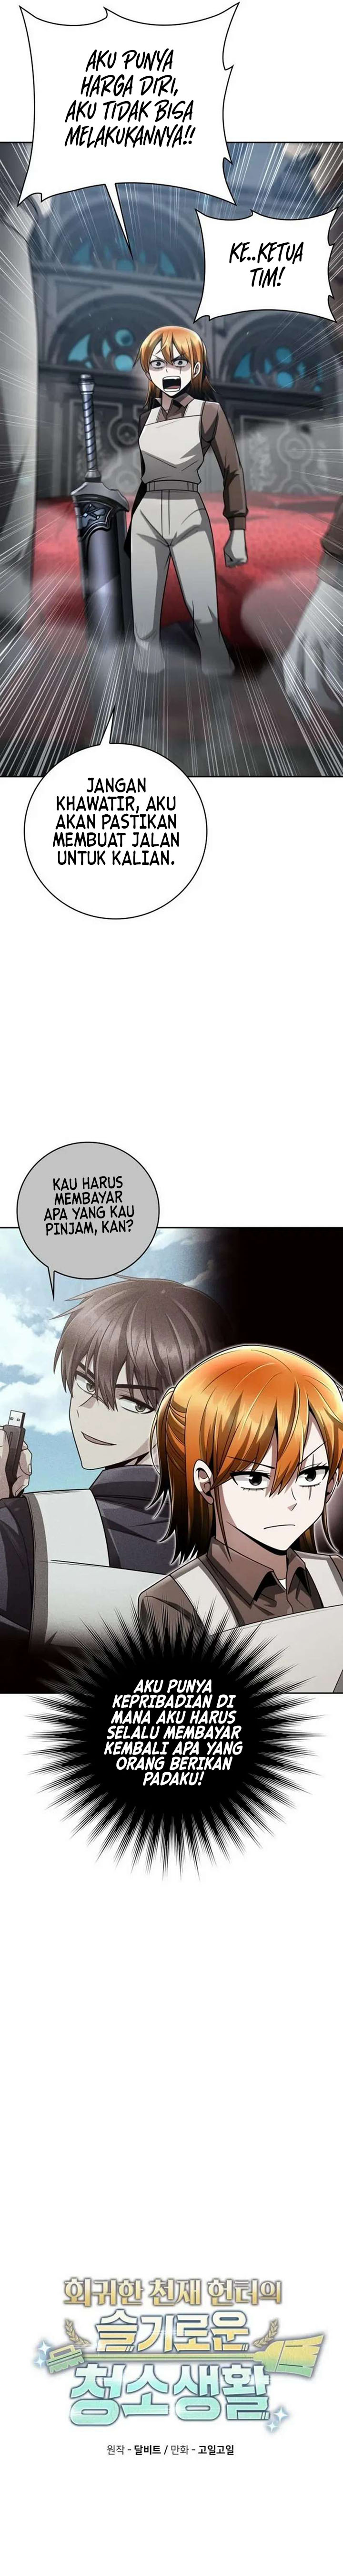 Dilarang COPAS - situs resmi www.mangacanblog.com - Komik clever cleaning life of the returned genius hunter 042 - chapter 42 43 Indonesia clever cleaning life of the returned genius hunter 042 - chapter 42 Terbaru 3|Baca Manga Komik Indonesia|Mangacan